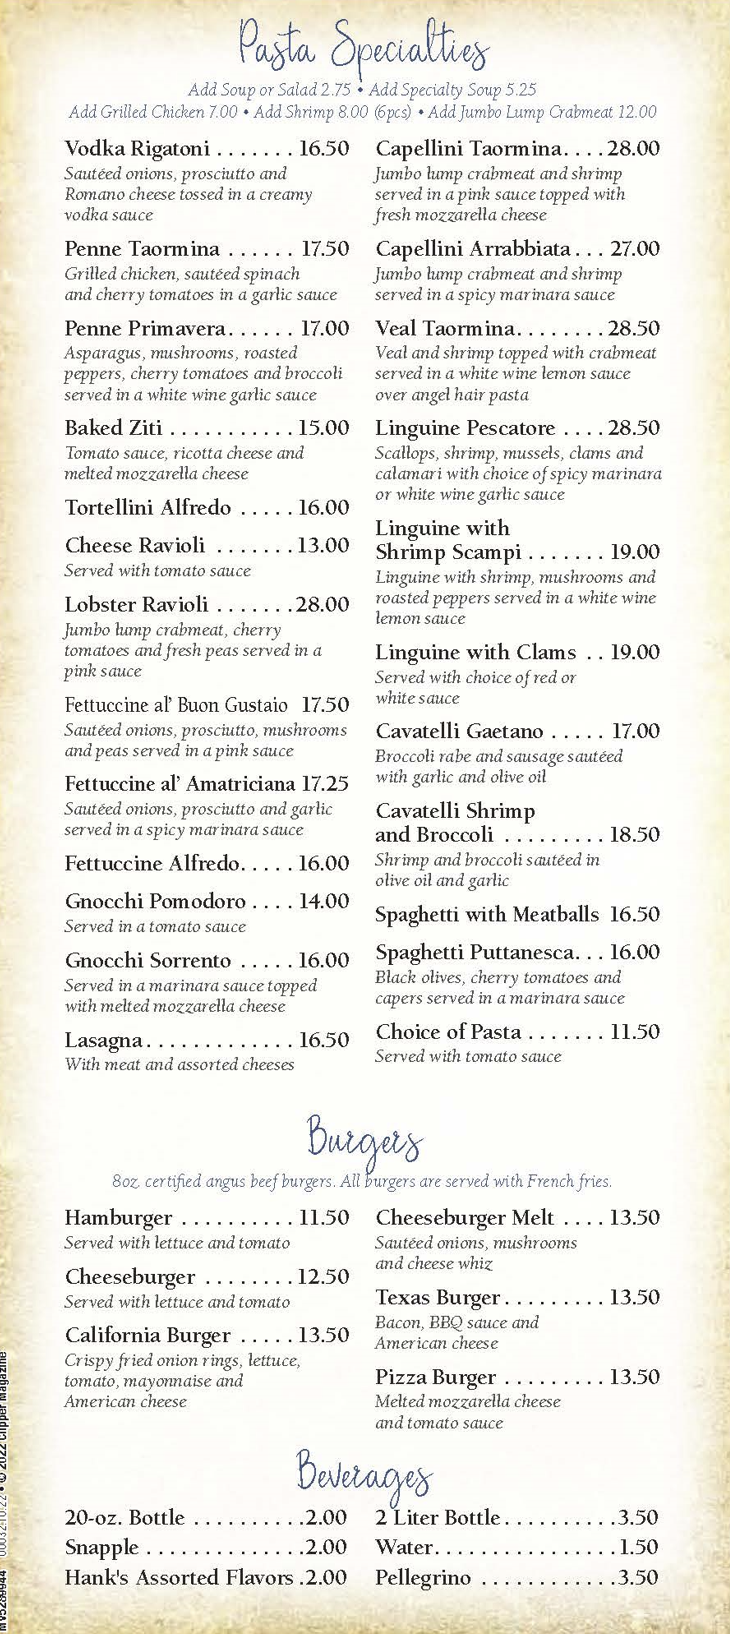 A menu for a restaurant with prices on it.